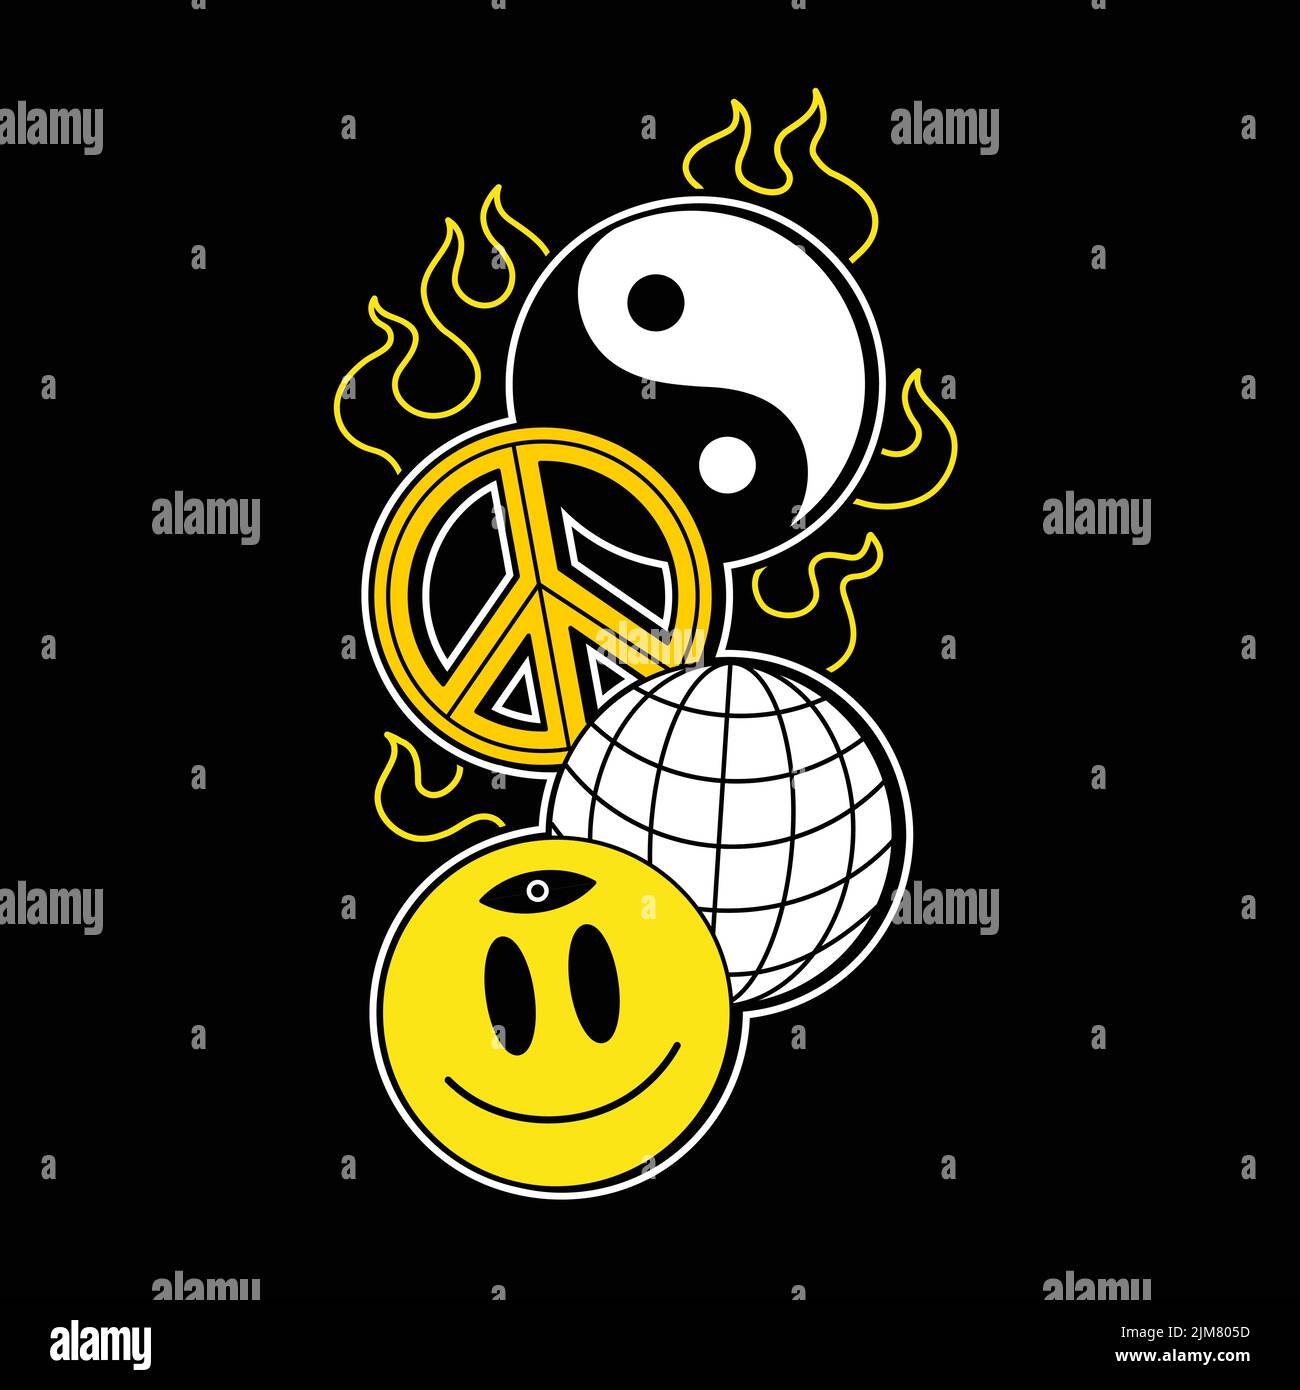 Yin Yang,sphere,smile face,peace signs burn in fire.Vector line graphic illustration logo design.Yin yang,earth sphere,smile face,hippie peace symbol,techno print for t-shirt,tee,poster concept Stock Vector